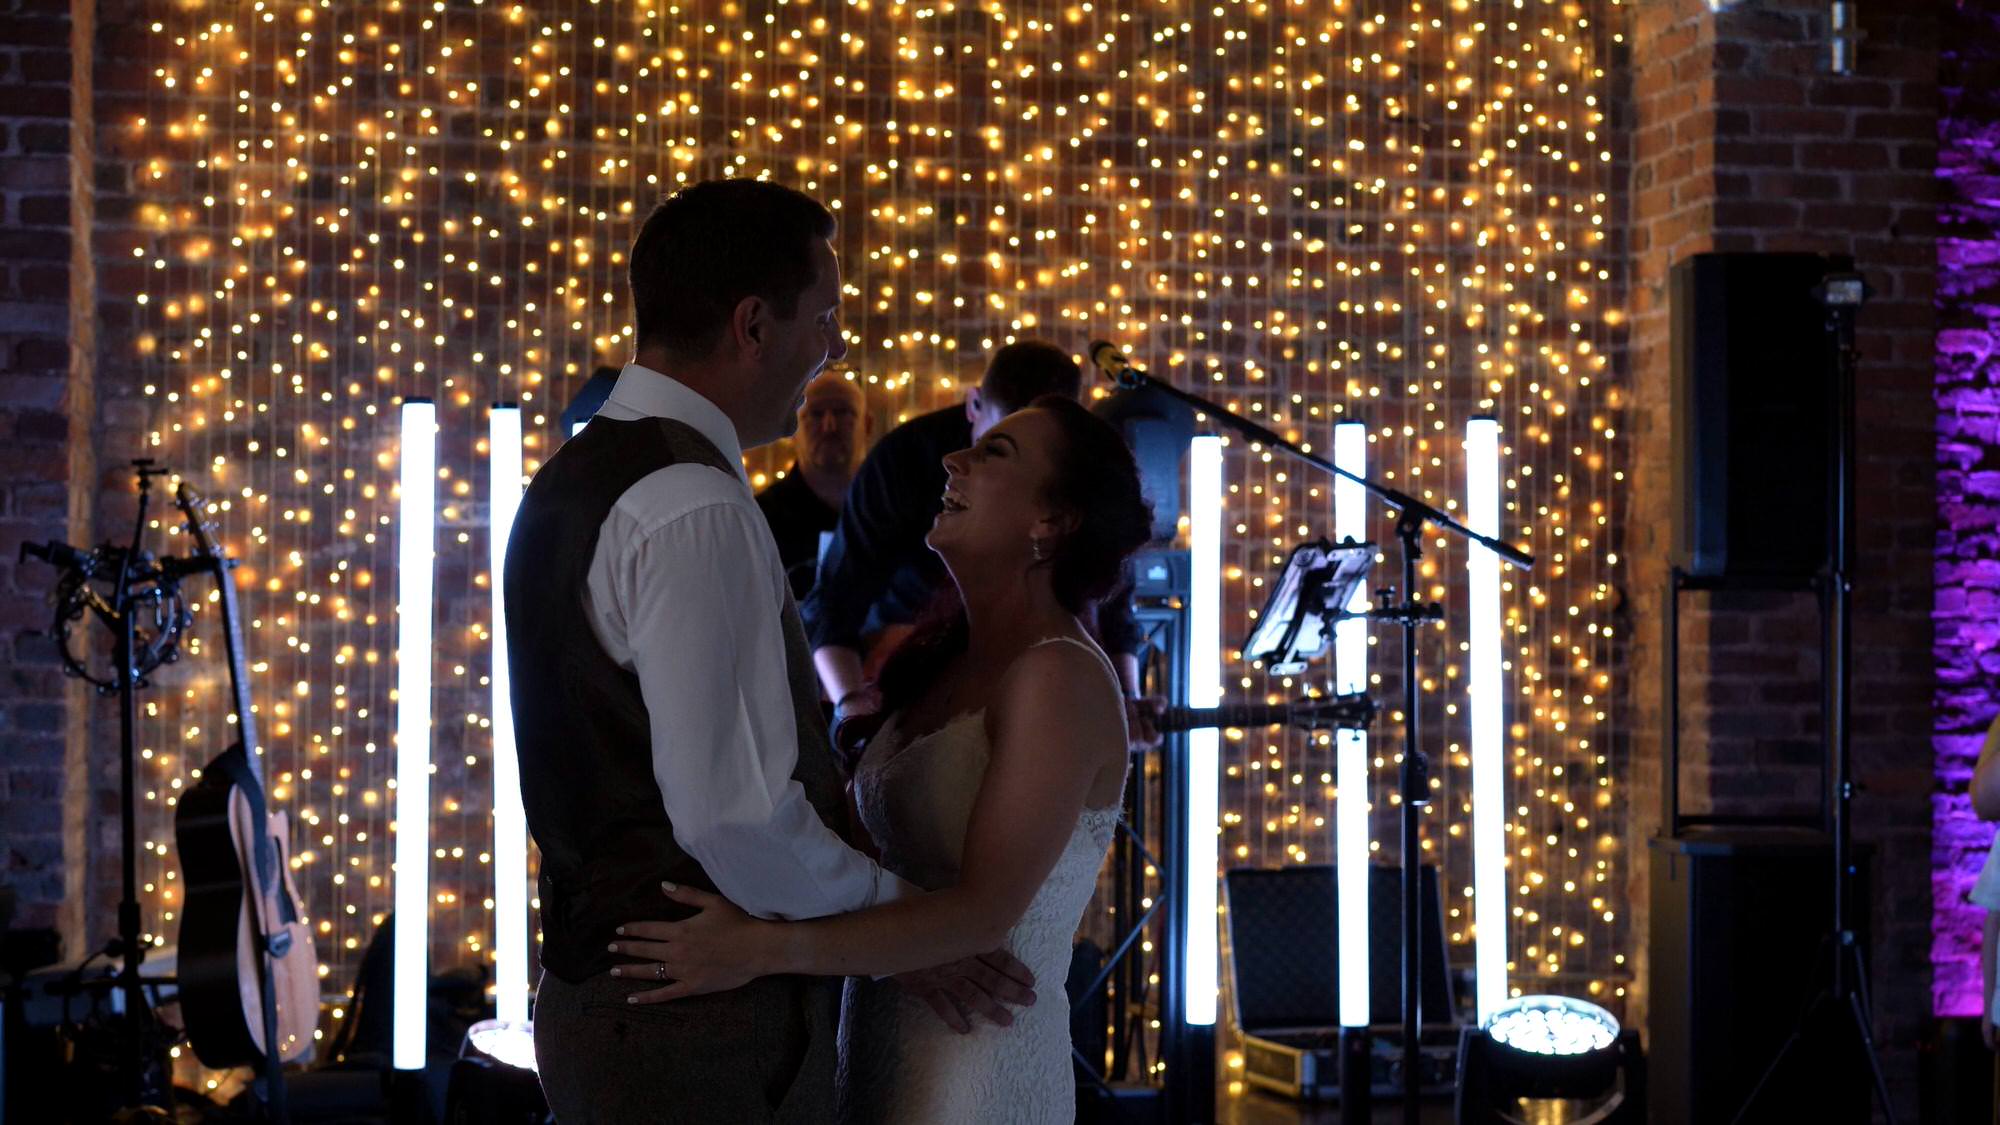 alex birtwell sings during first dance at the barn at morleys hall